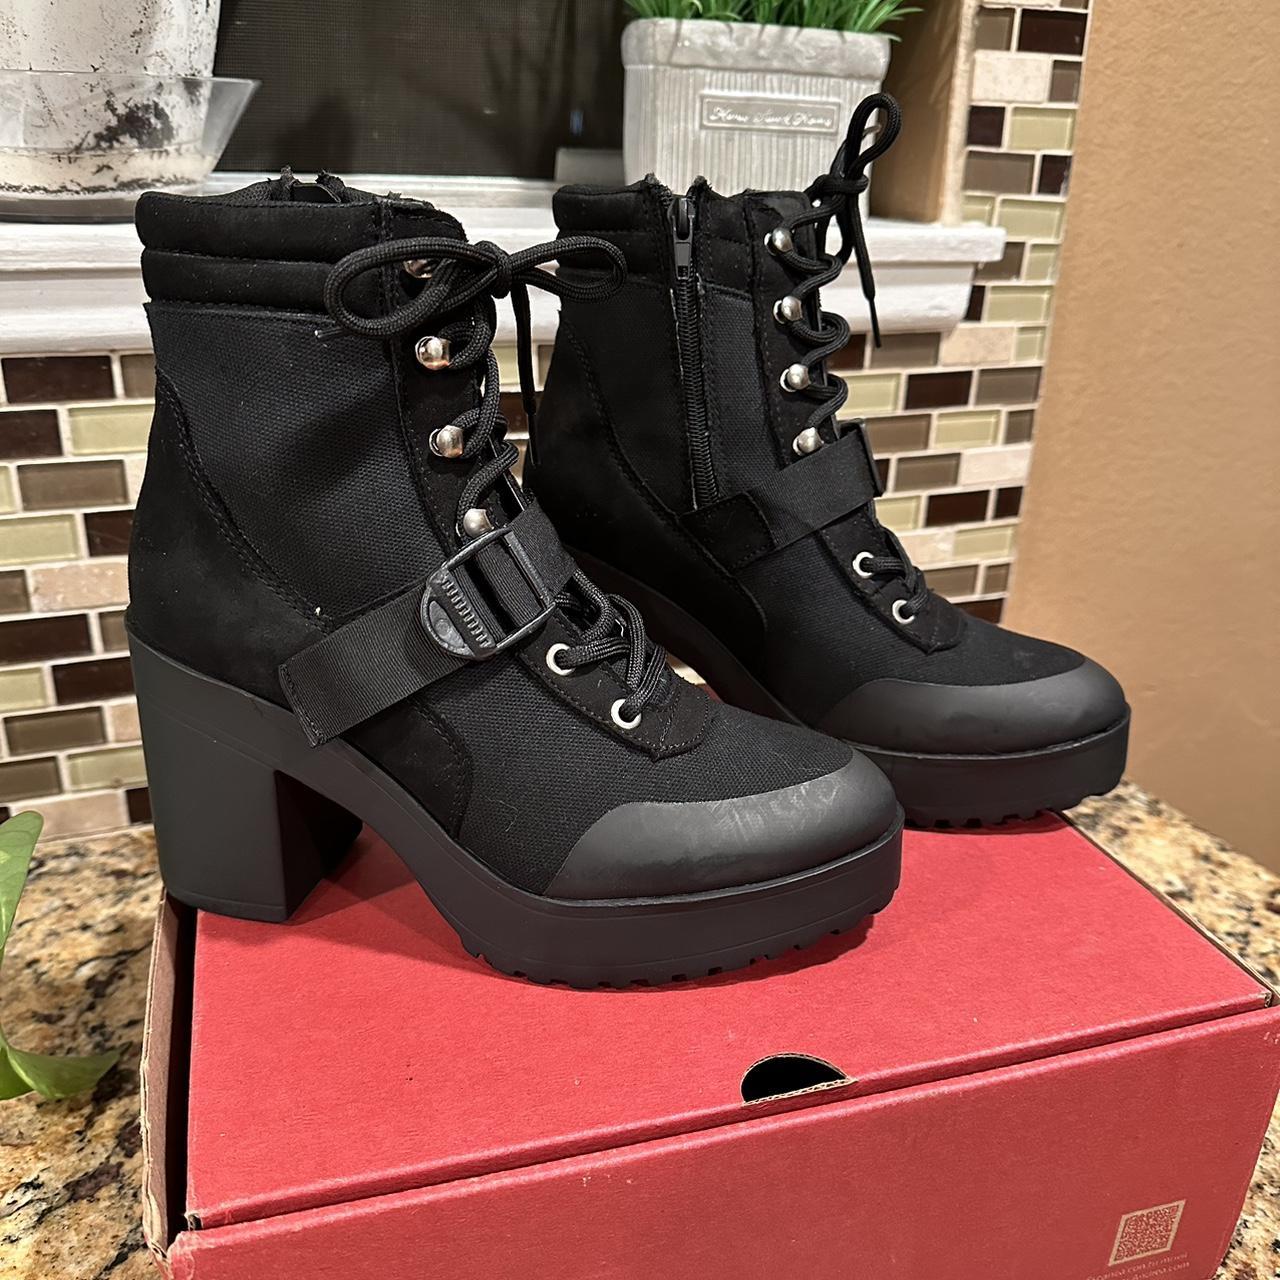 Andrea boots Never used - Depop